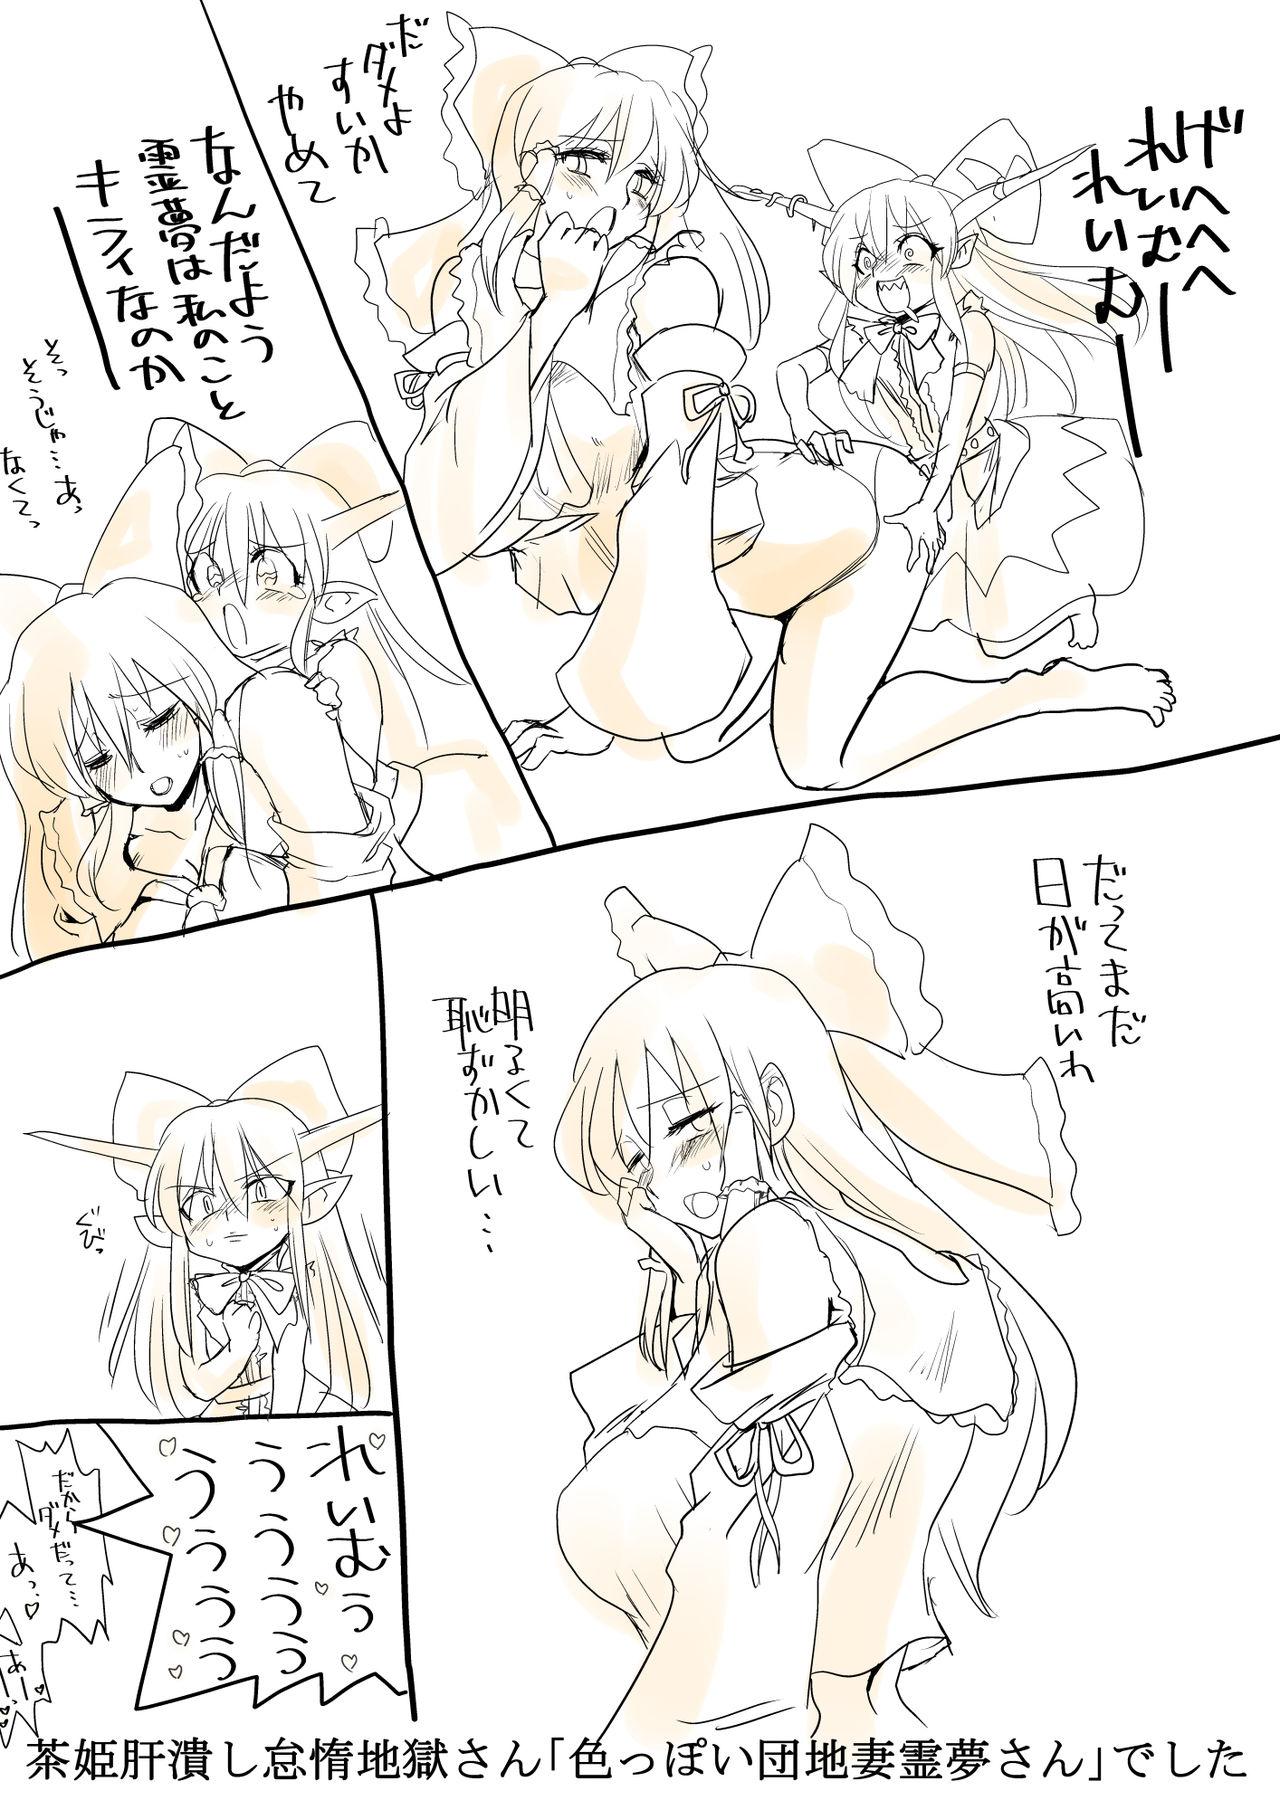 Hairy Pussy Touhou Request Gashuu Sono 1 - Touhou project Gay Kissing - Page 6